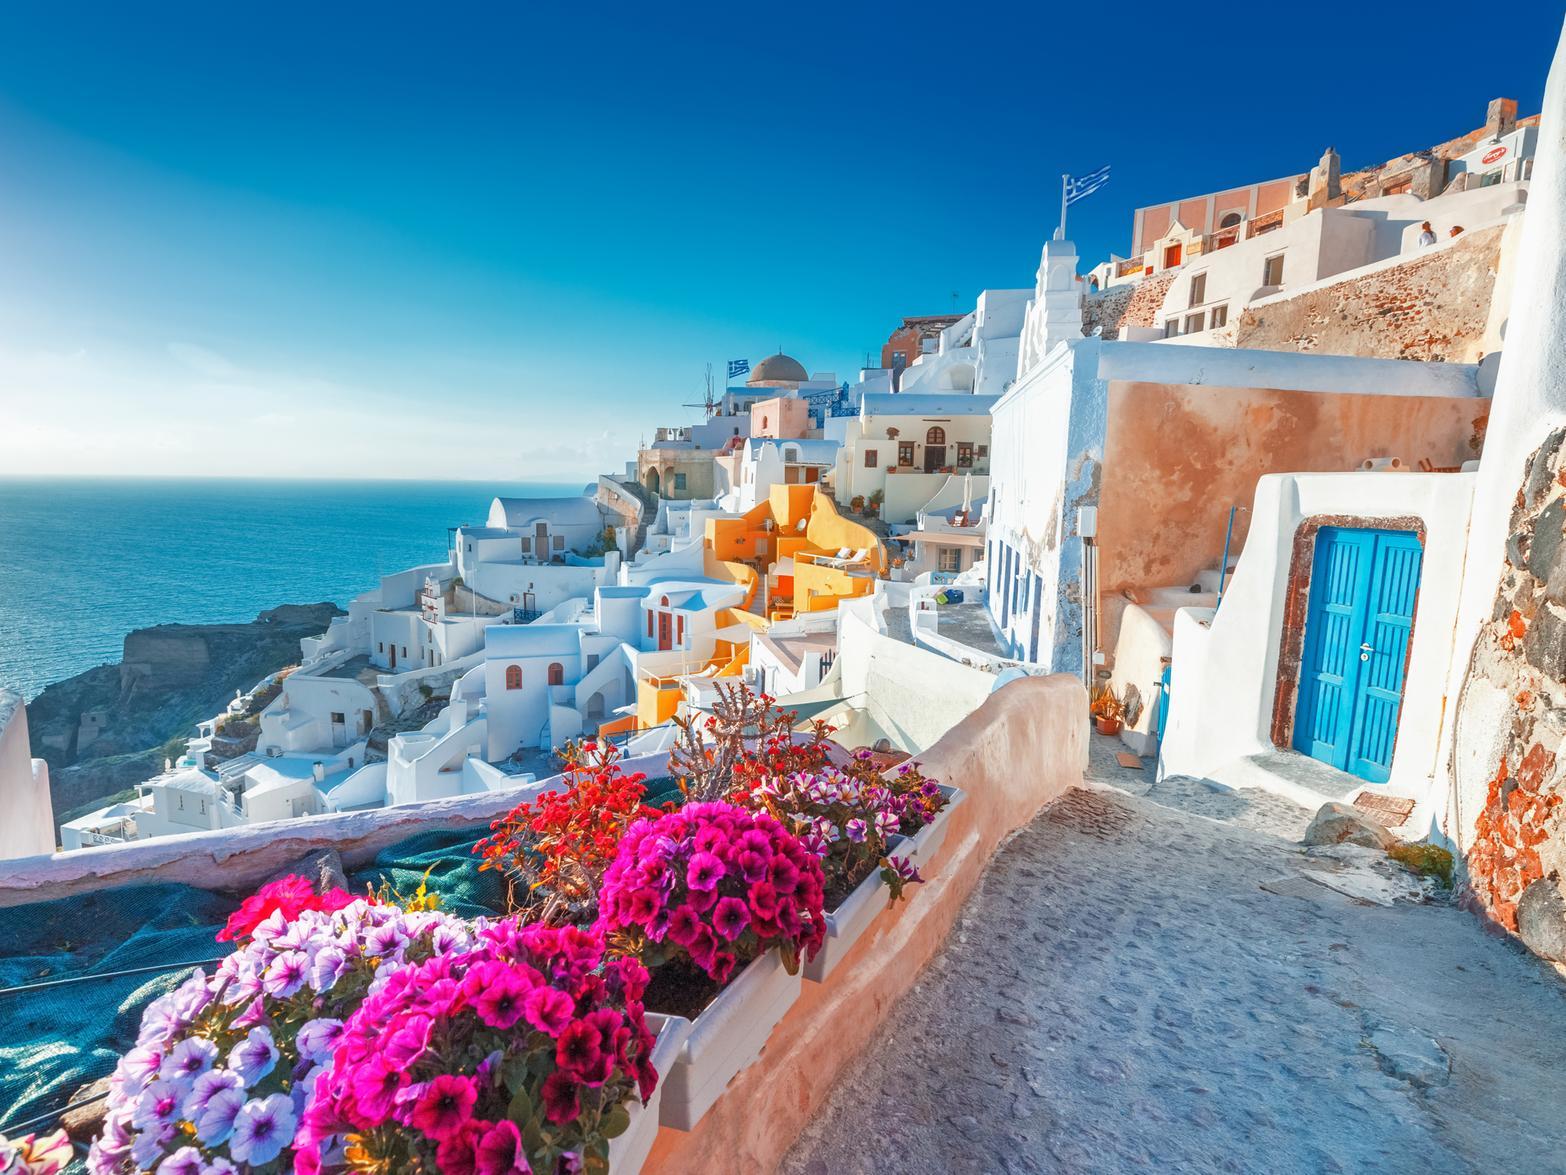 Greece is warm and sunny during April, making it the perfect Easter holiday destination. Theres a variety of places to choose from, ranging from the mainland to the islands, with temperatures reaching highs of 21C depending on location.